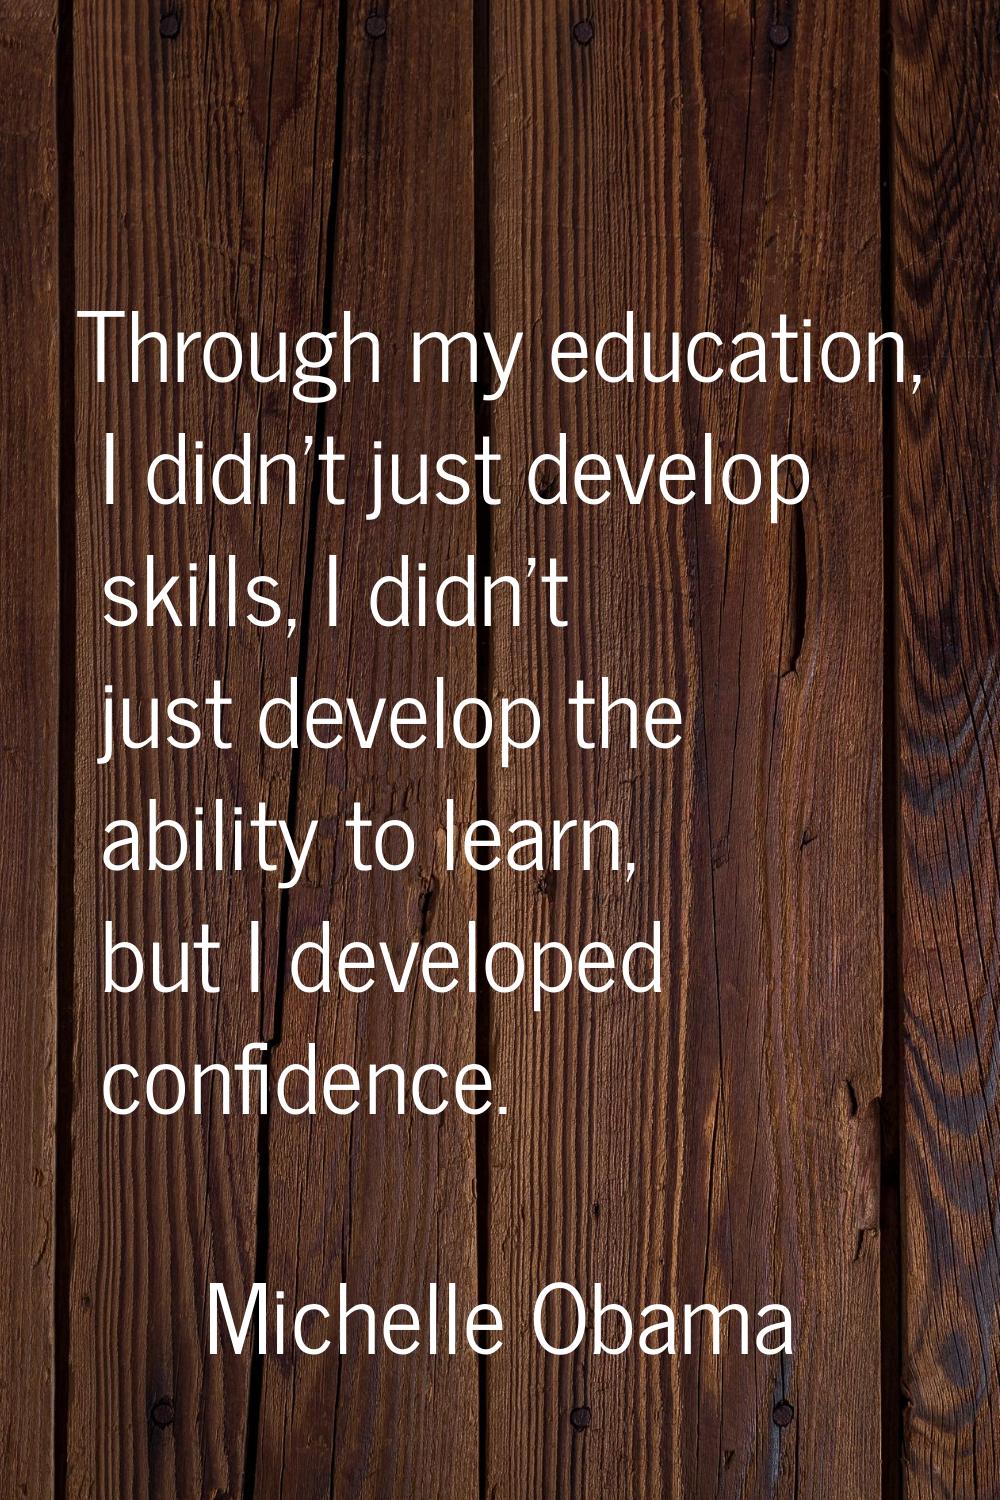 Through my education, I didn't just develop skills, I didn't just develop the ability to learn, but